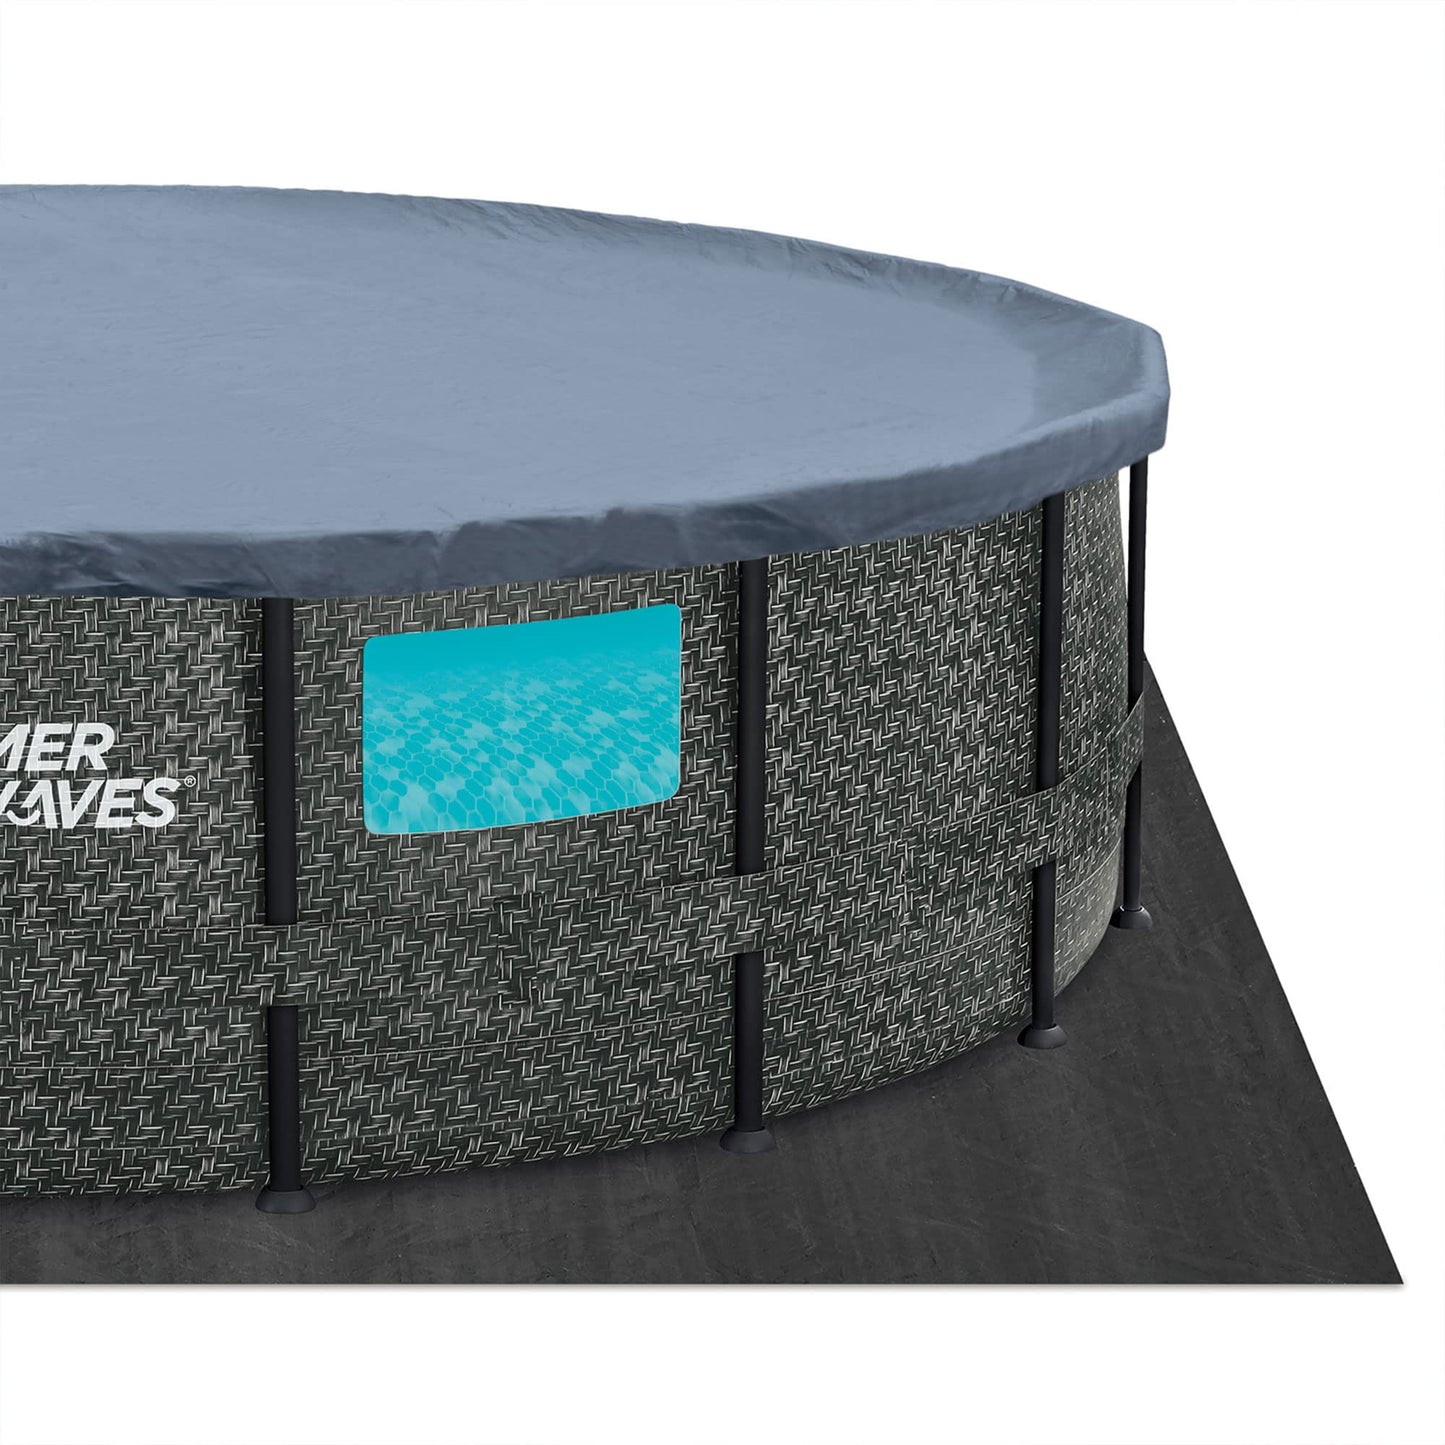 Summer Waves Elite P8A01648B 16ft x 48in Above Ground Frame Swimming Pool Set w/Filter Pump, Pool Cover, Ladder, Ground Cloth, & Maintenance Kit 192 x 192 x 48 inches Gray